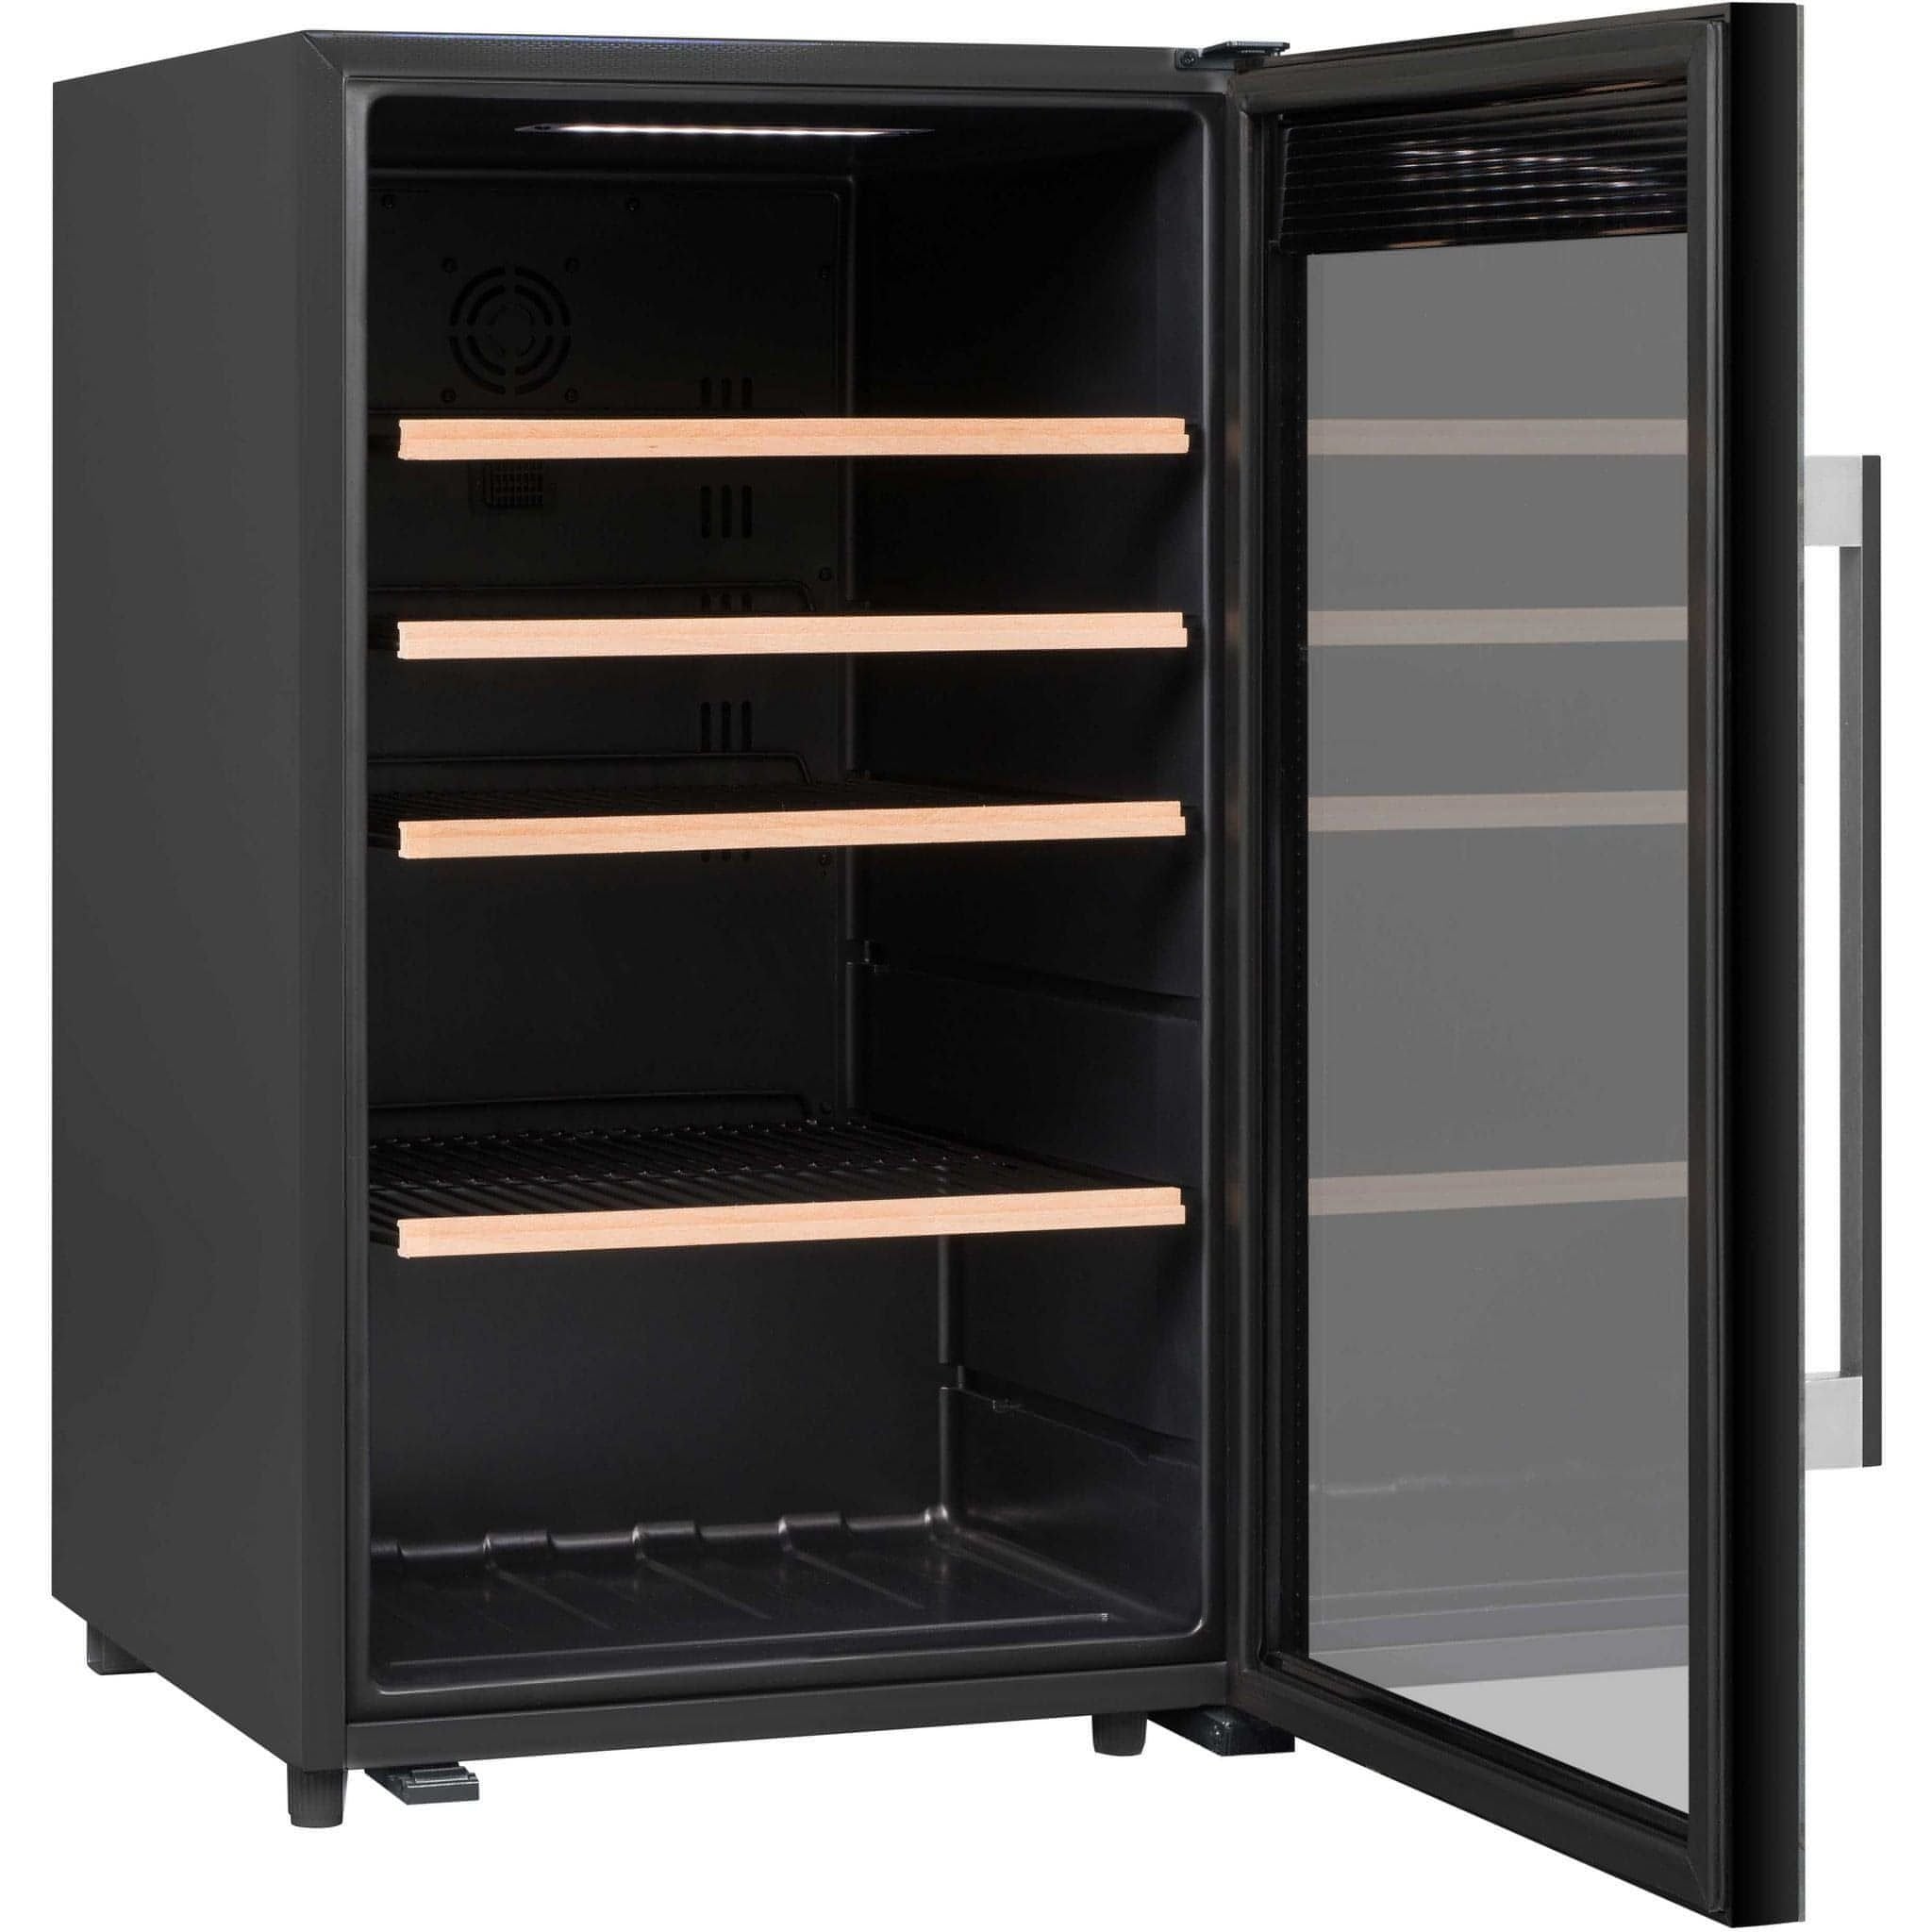 Climadiff - 63 Bottle - Freestanding Wine Cooler CLS65B1